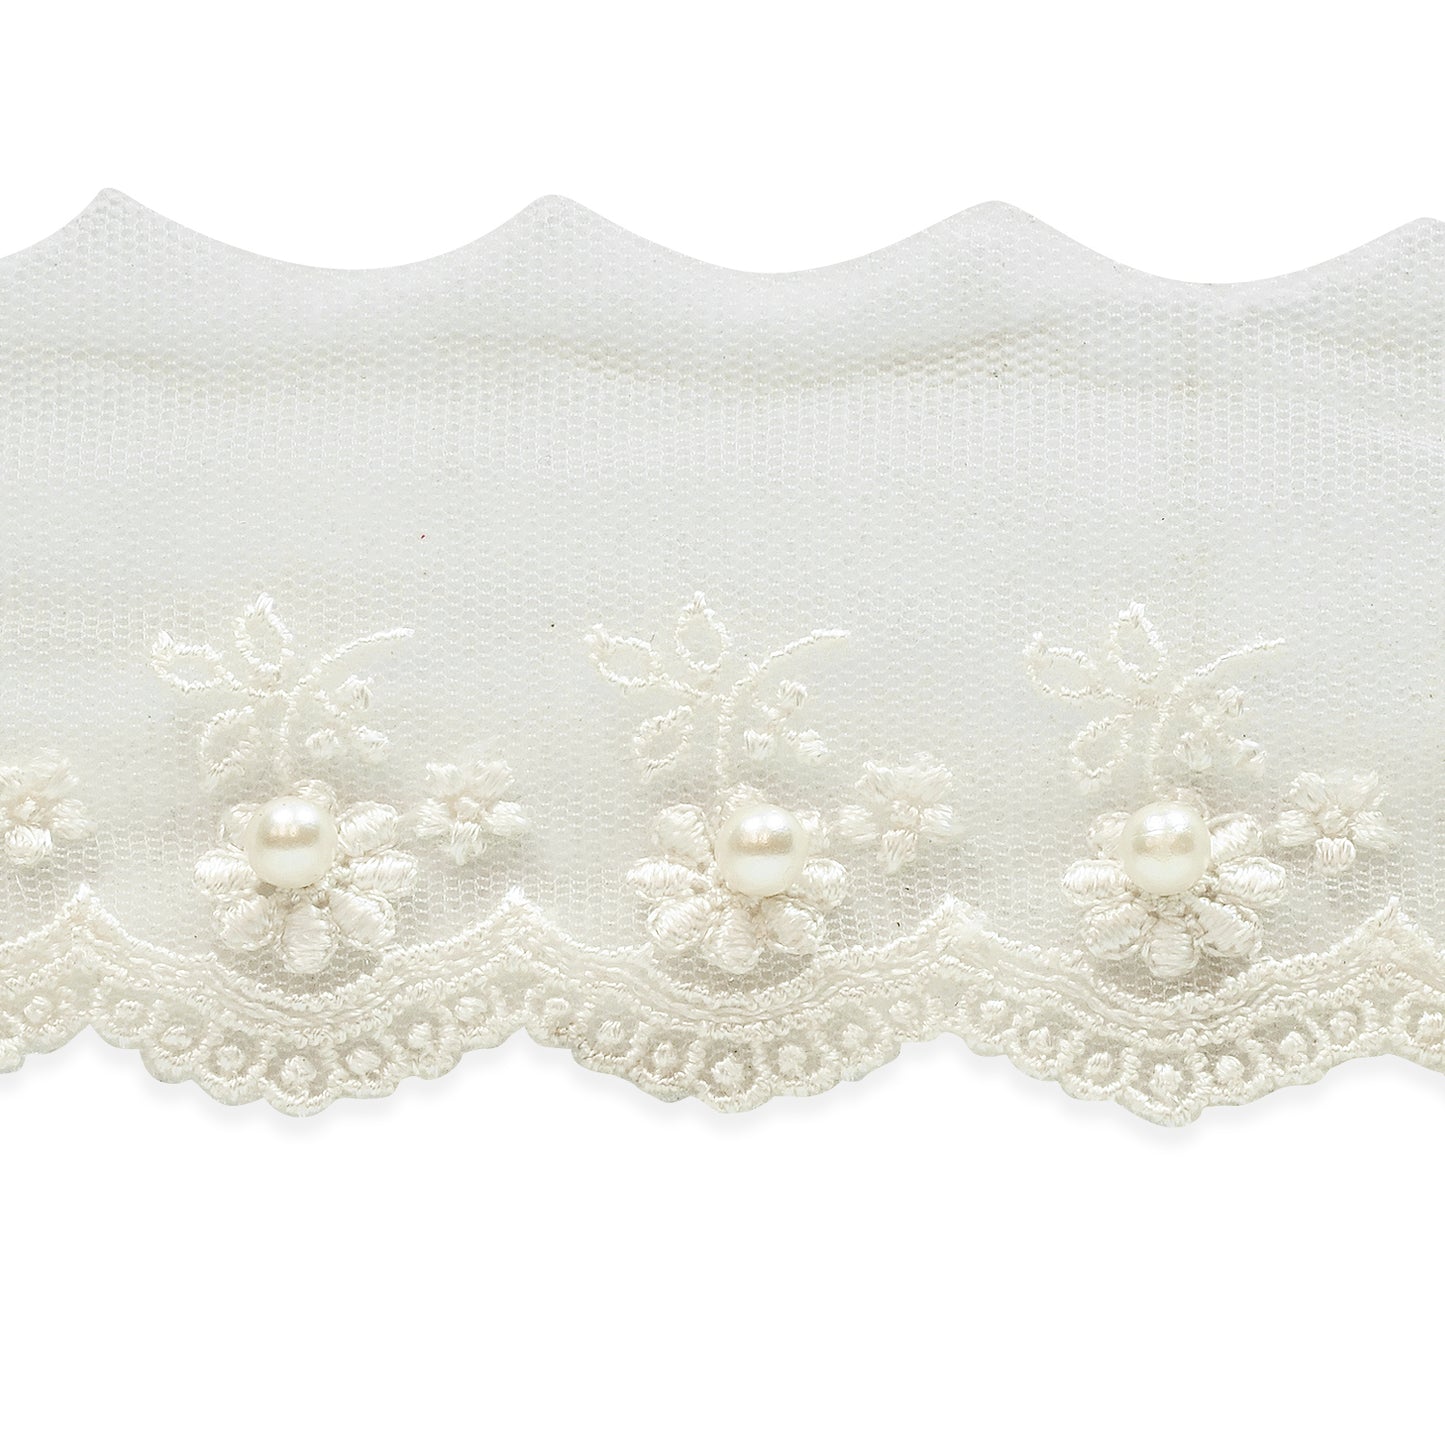 Vintage Daisy with Pearl Bridal Lace Trim (Sold by the Yard)